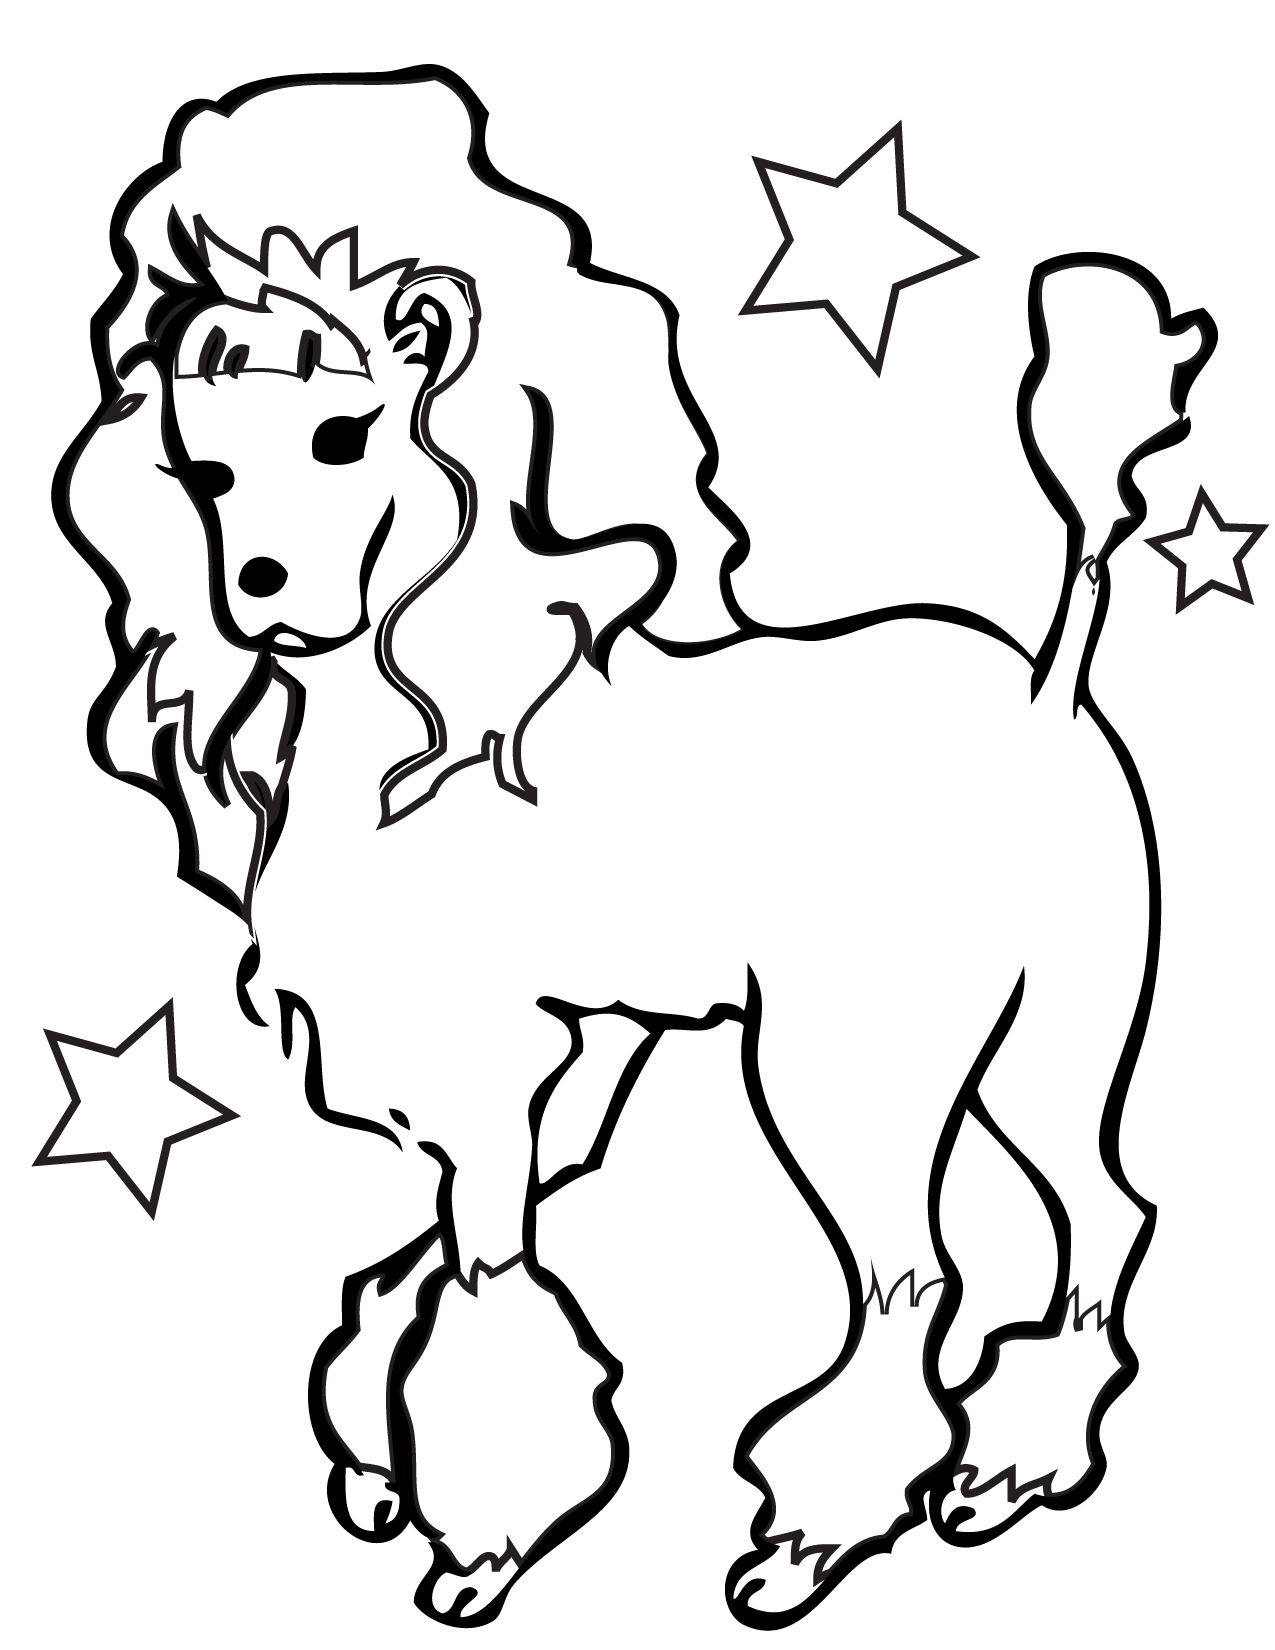 Dogs Coloring Pages - Coloring Kids